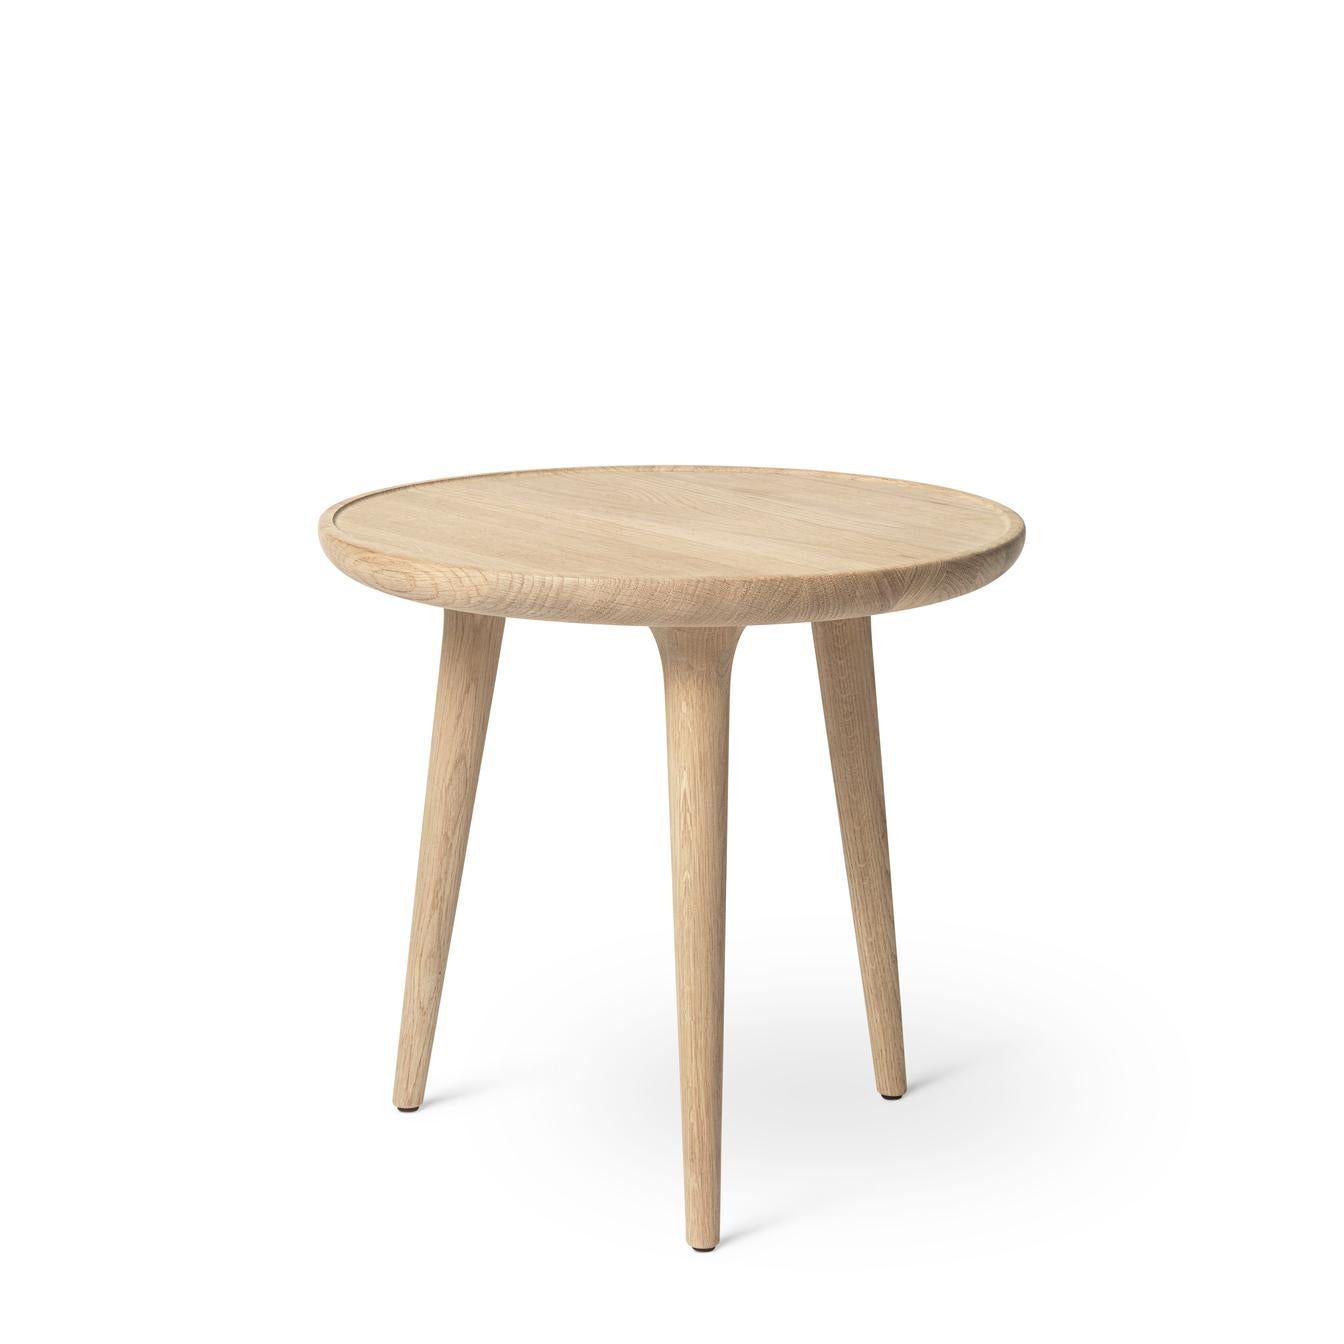 The Mater accent table is designed by the Danish architect duo Space Copenhagen and combines a sculptural and handcrafted aesthetic. Following along the same bloodline as the highly successful 2009 Mater High Stool, the Accent collection consists of